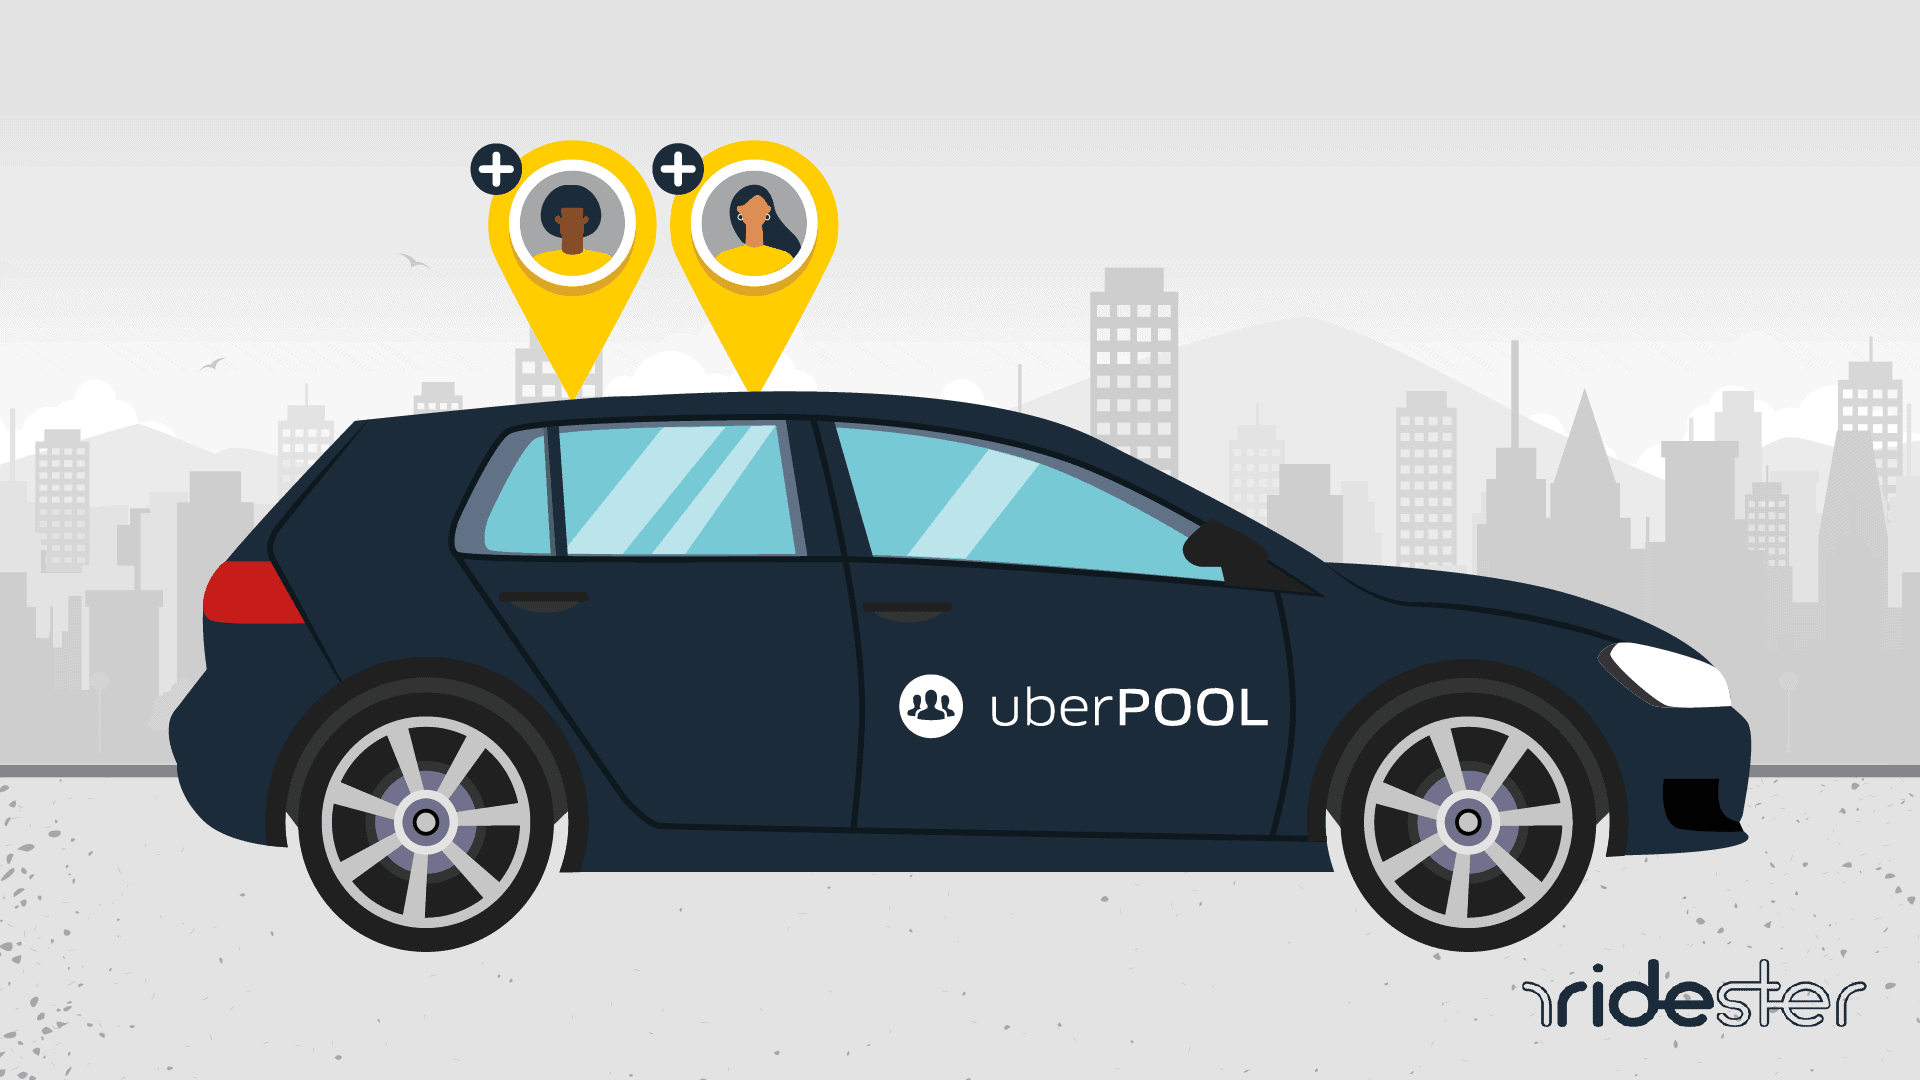 vector graphic showing two uber riders outside of an uberpool vehicle